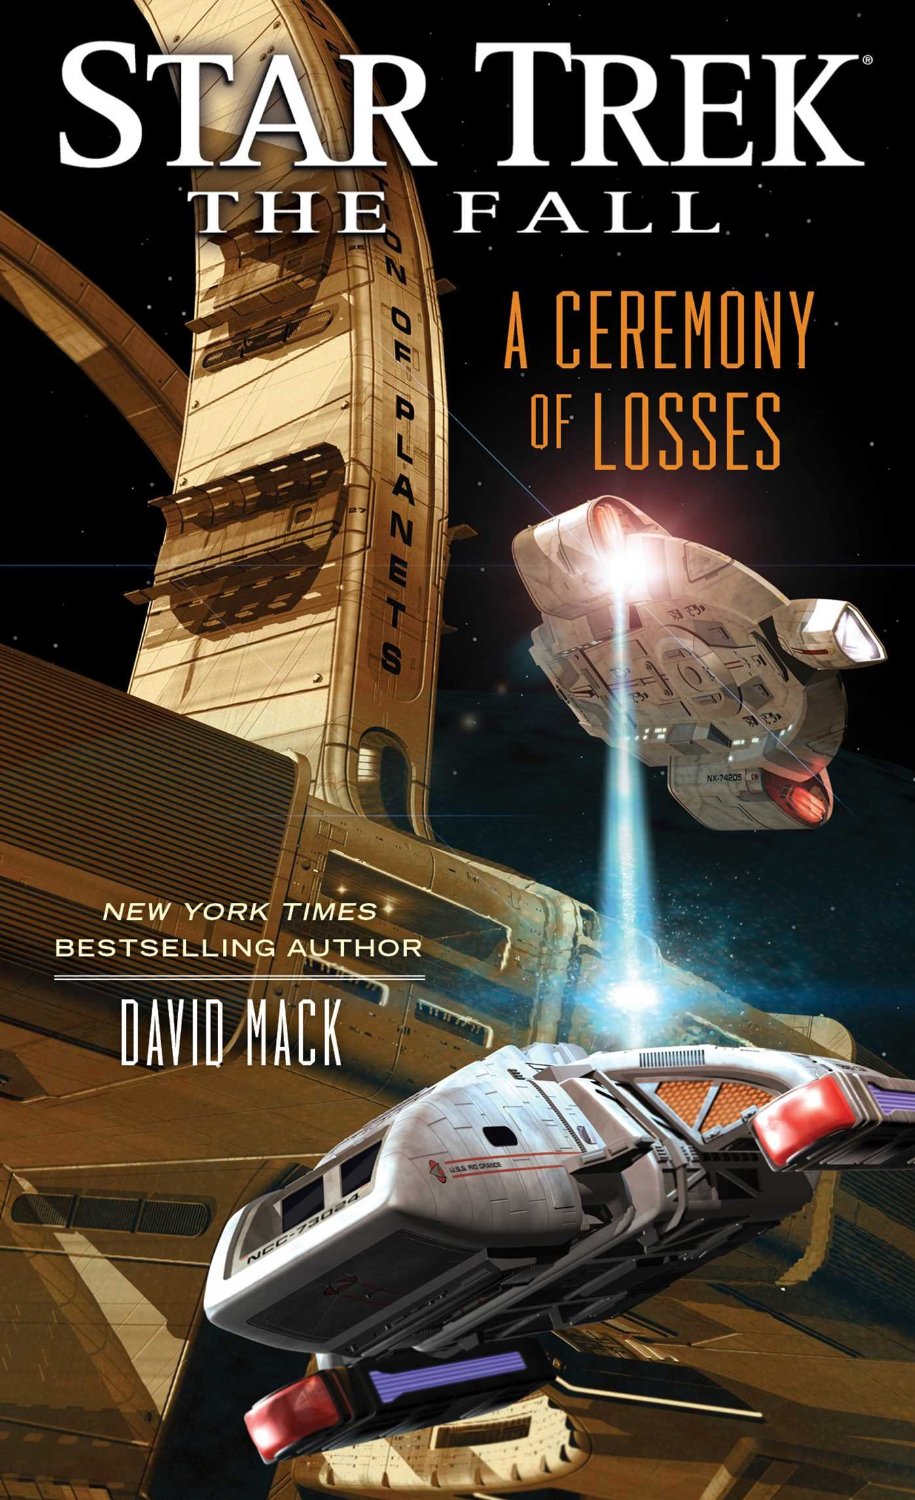 “Star Trek: The Fall: A Ceremony of Losses” Review by Jimsscifi.blogspot.com